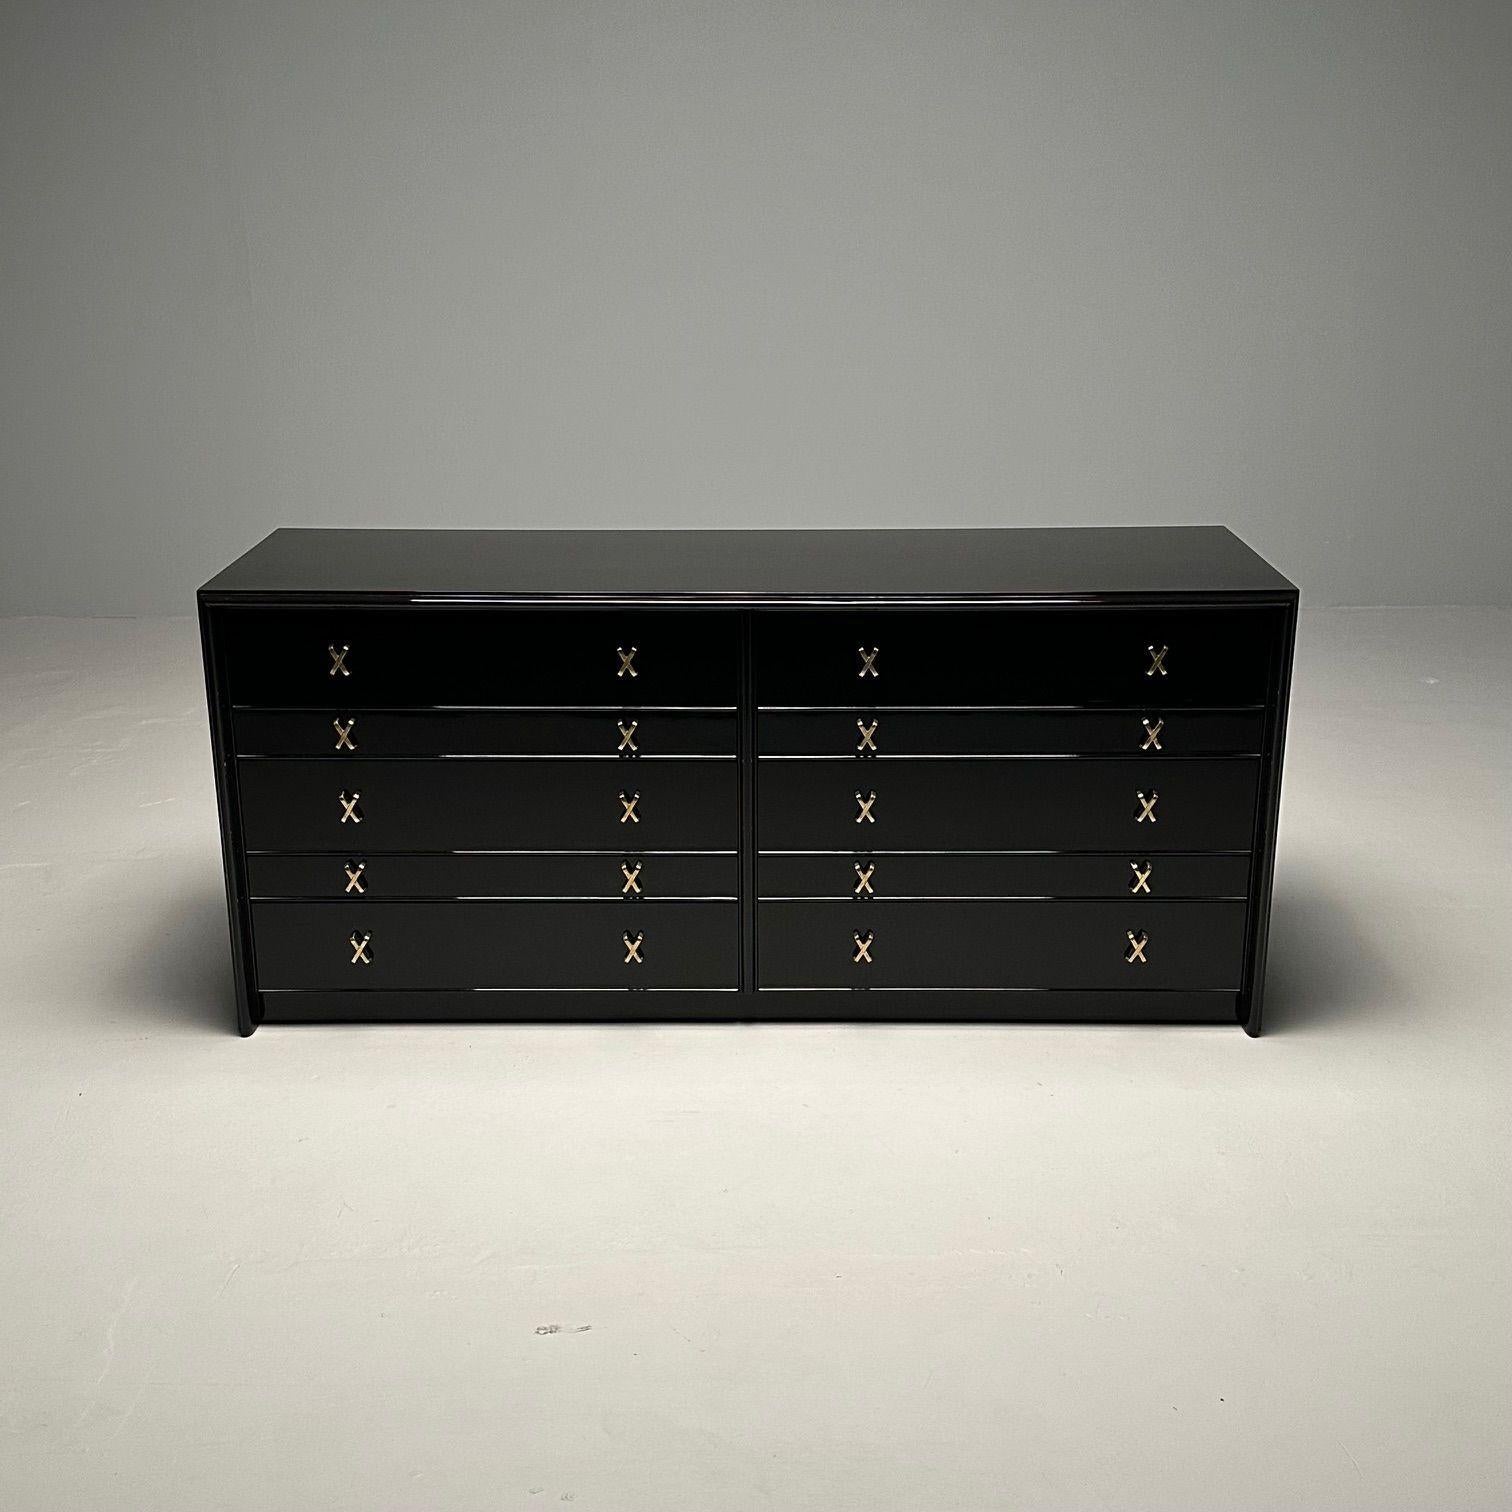 Mid-Century Modern Black Lacquer Paul Frankl Stamped John Stuart Double Dresser

A spectacular dresser designed by Paul Frankl for John Stuart, recently fully restored with the application of a super fine black lacquer. The custom 'X' style drawer